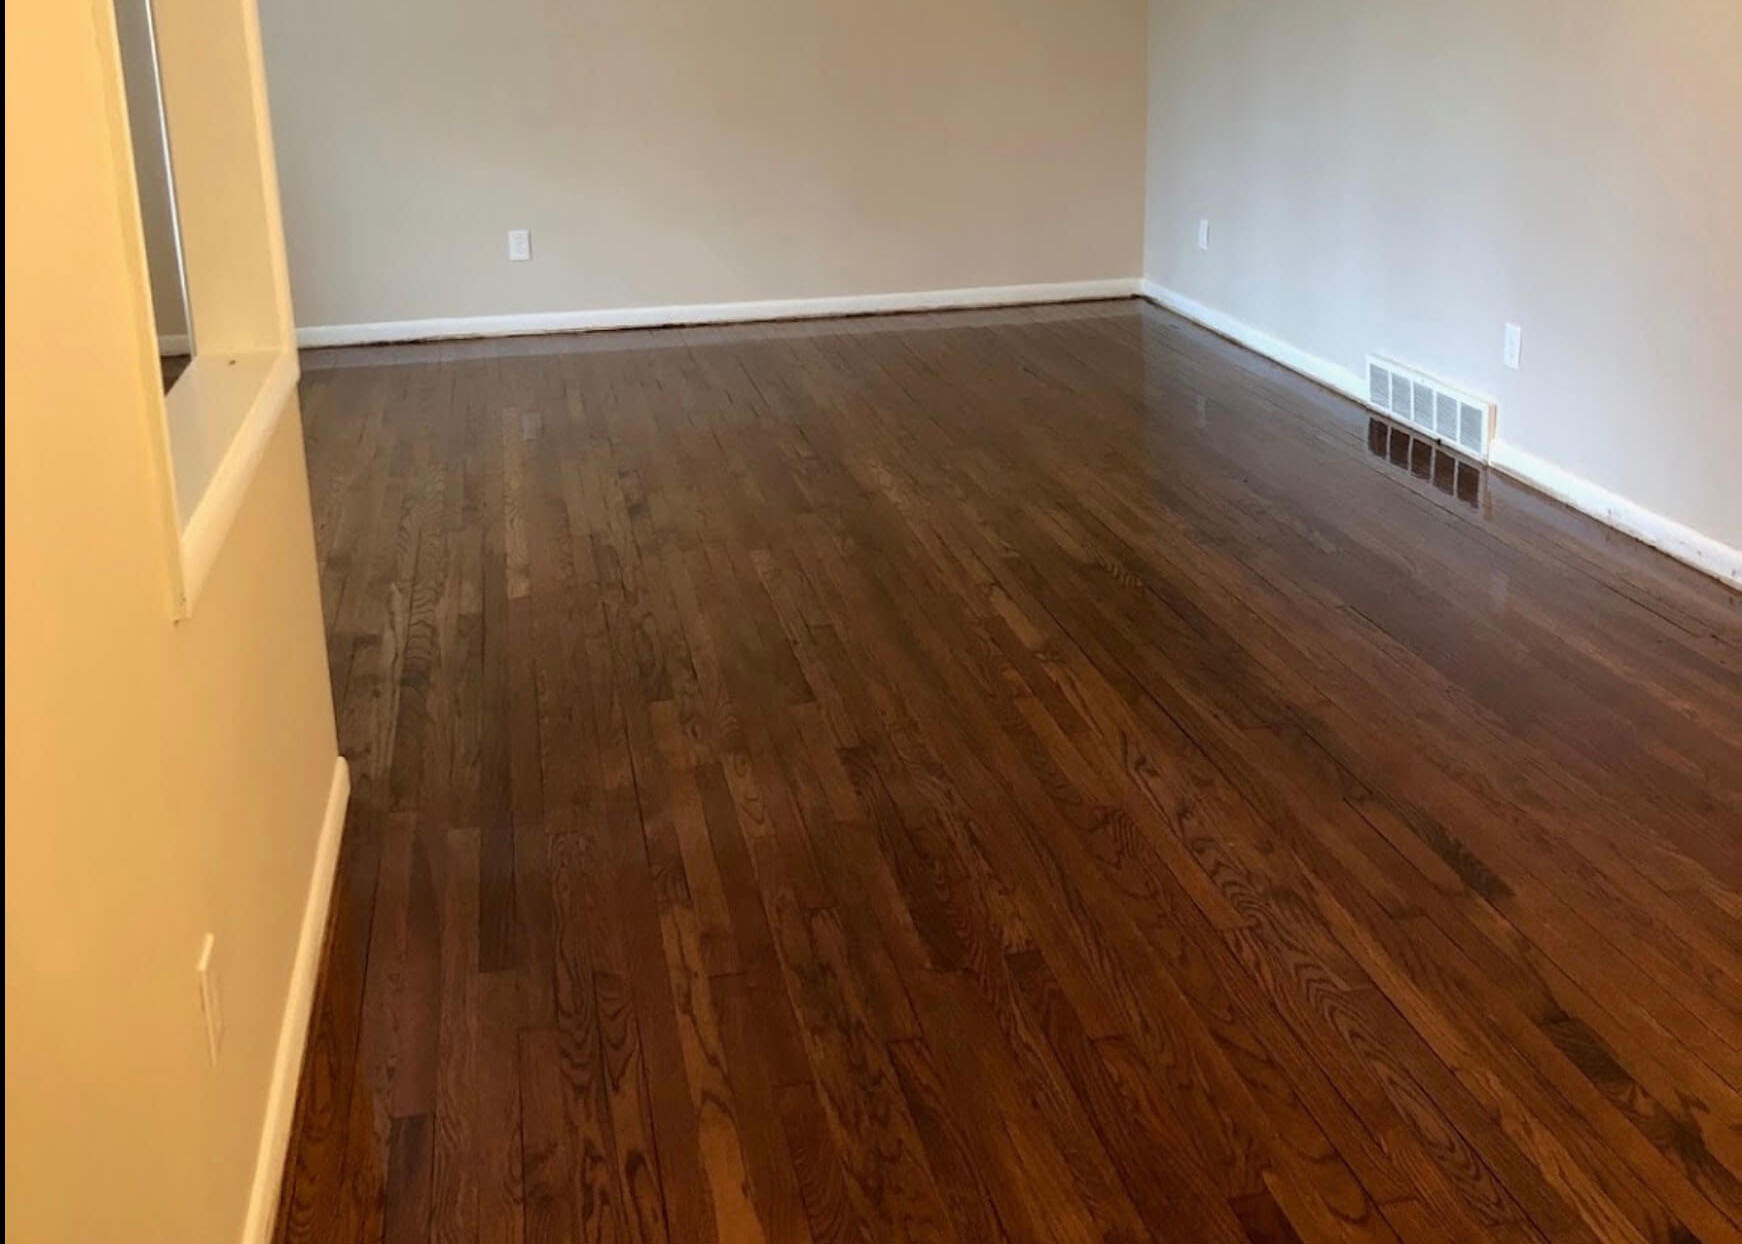 a floor after being refinished